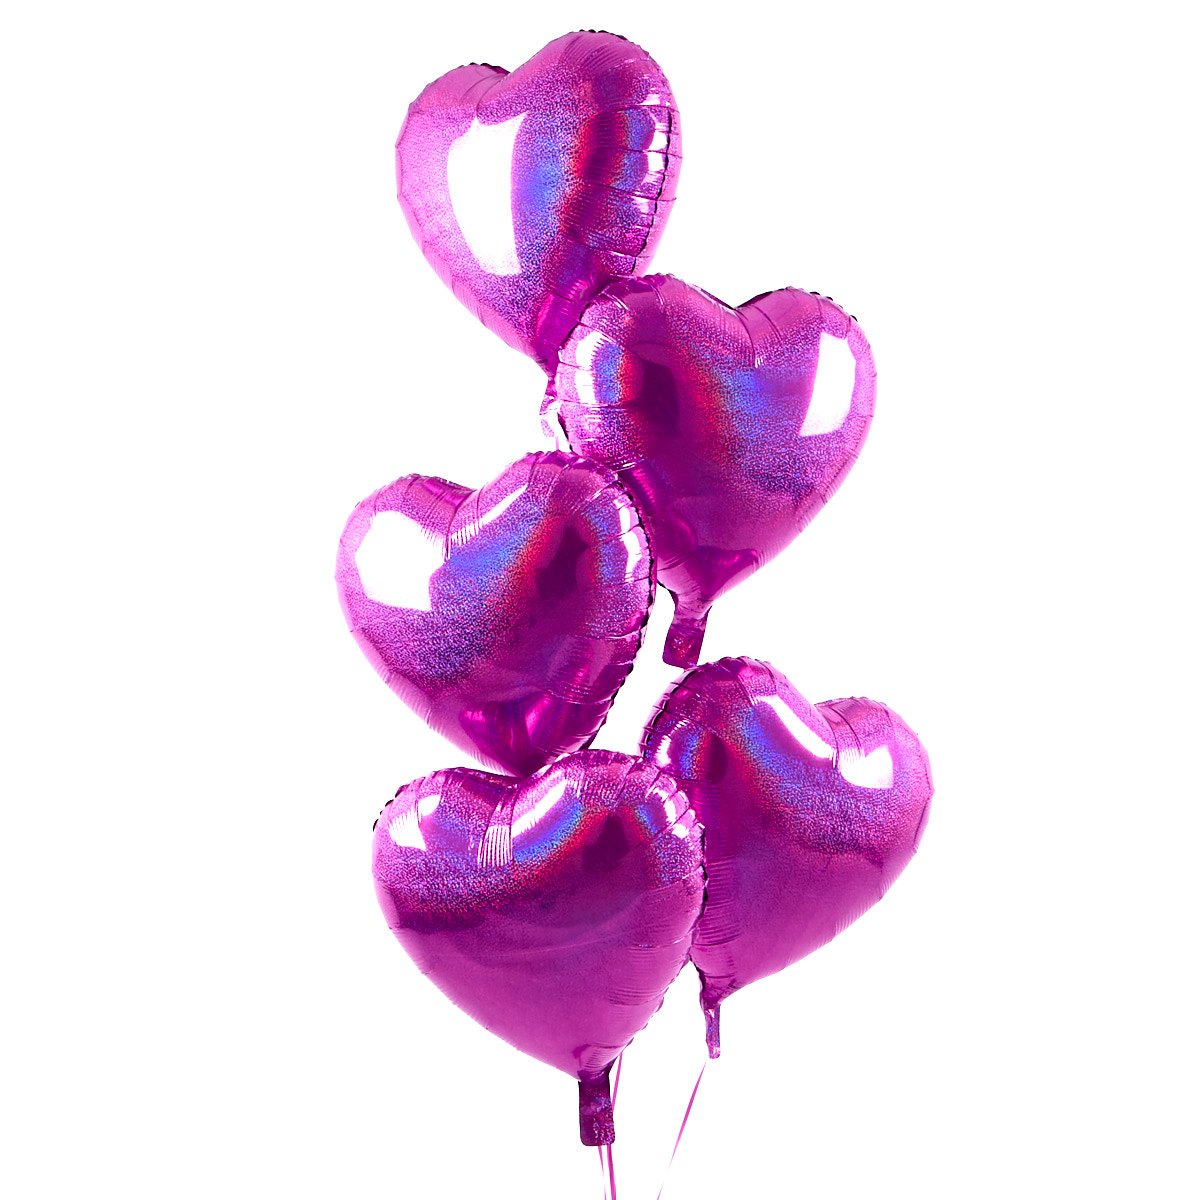 5 Pink Hearts Balloon Bouquet - DELIVERED INFLATED!